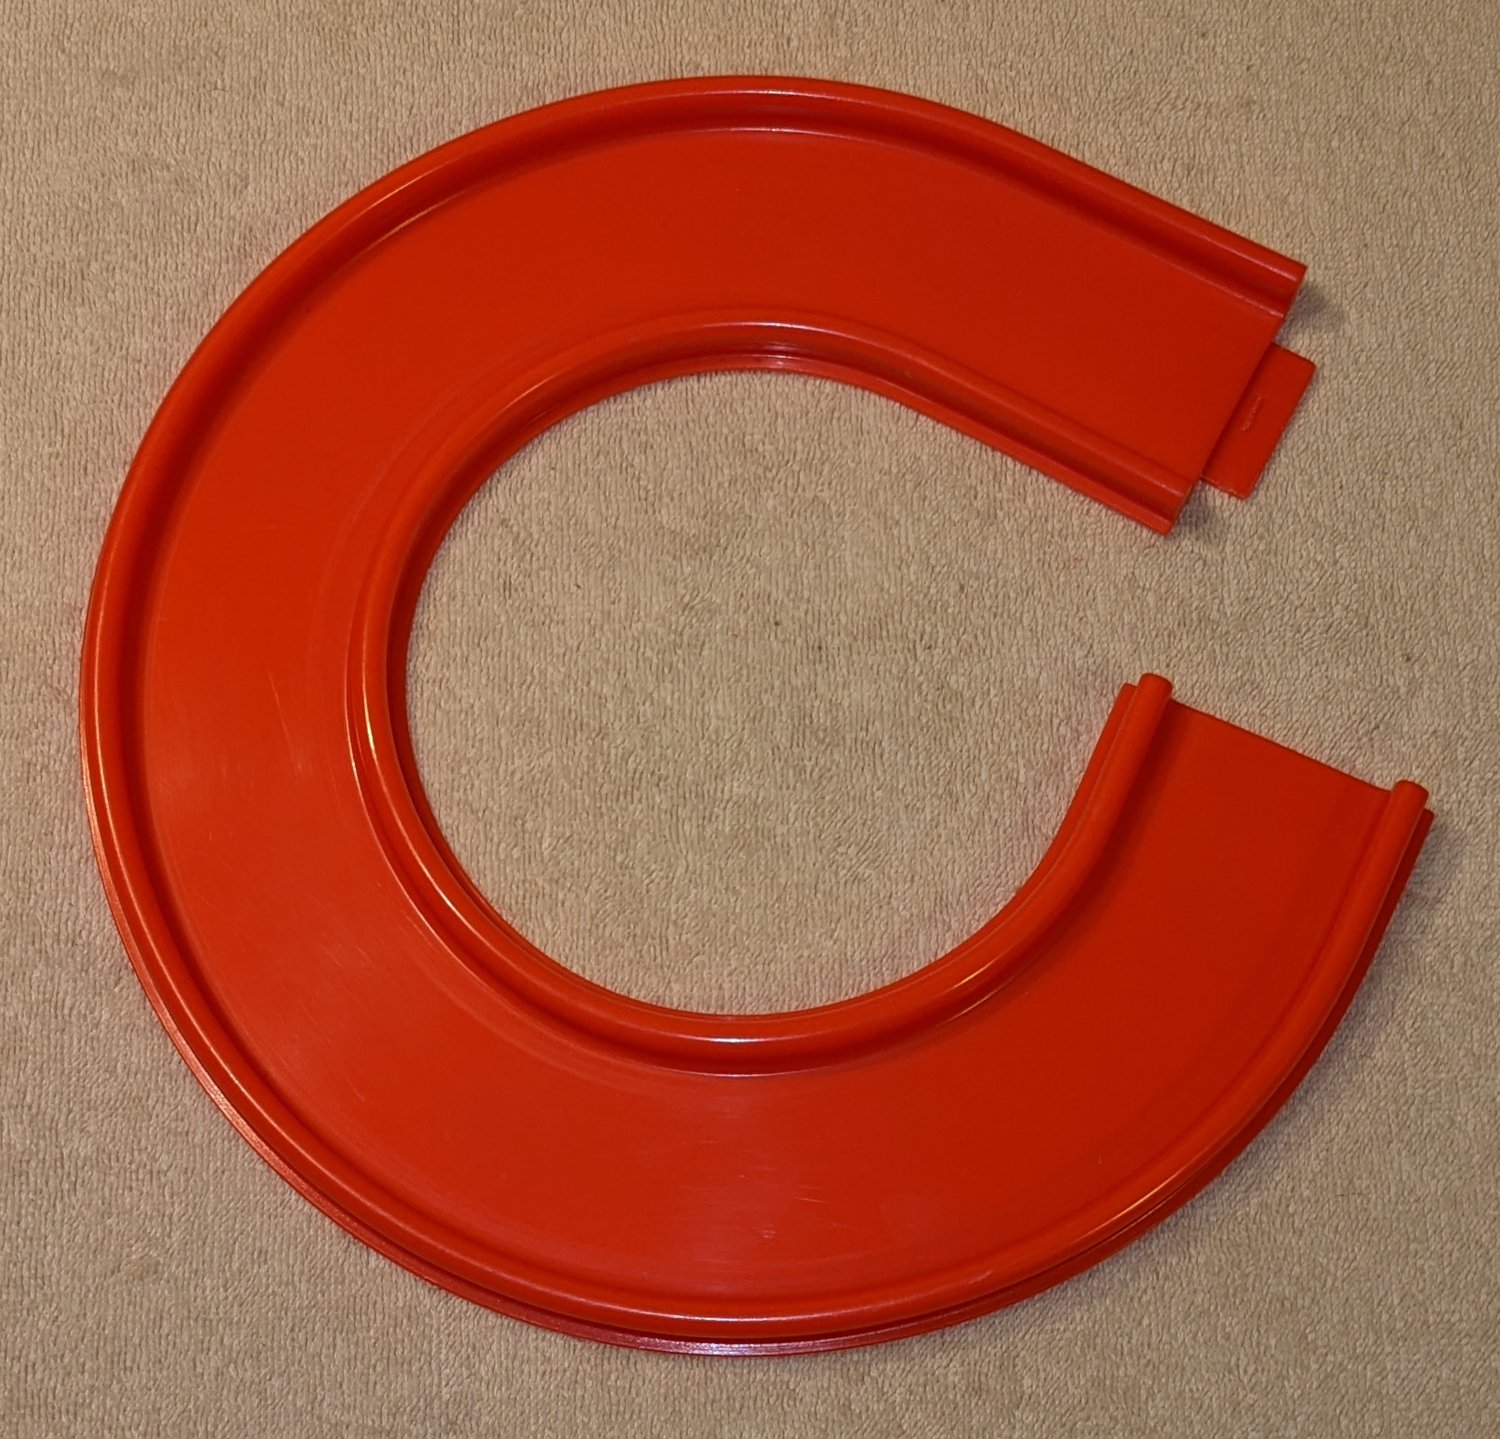 Sesame Street Continuous Action Roller Coaster Replacement Part Red Track ILLCO 1991